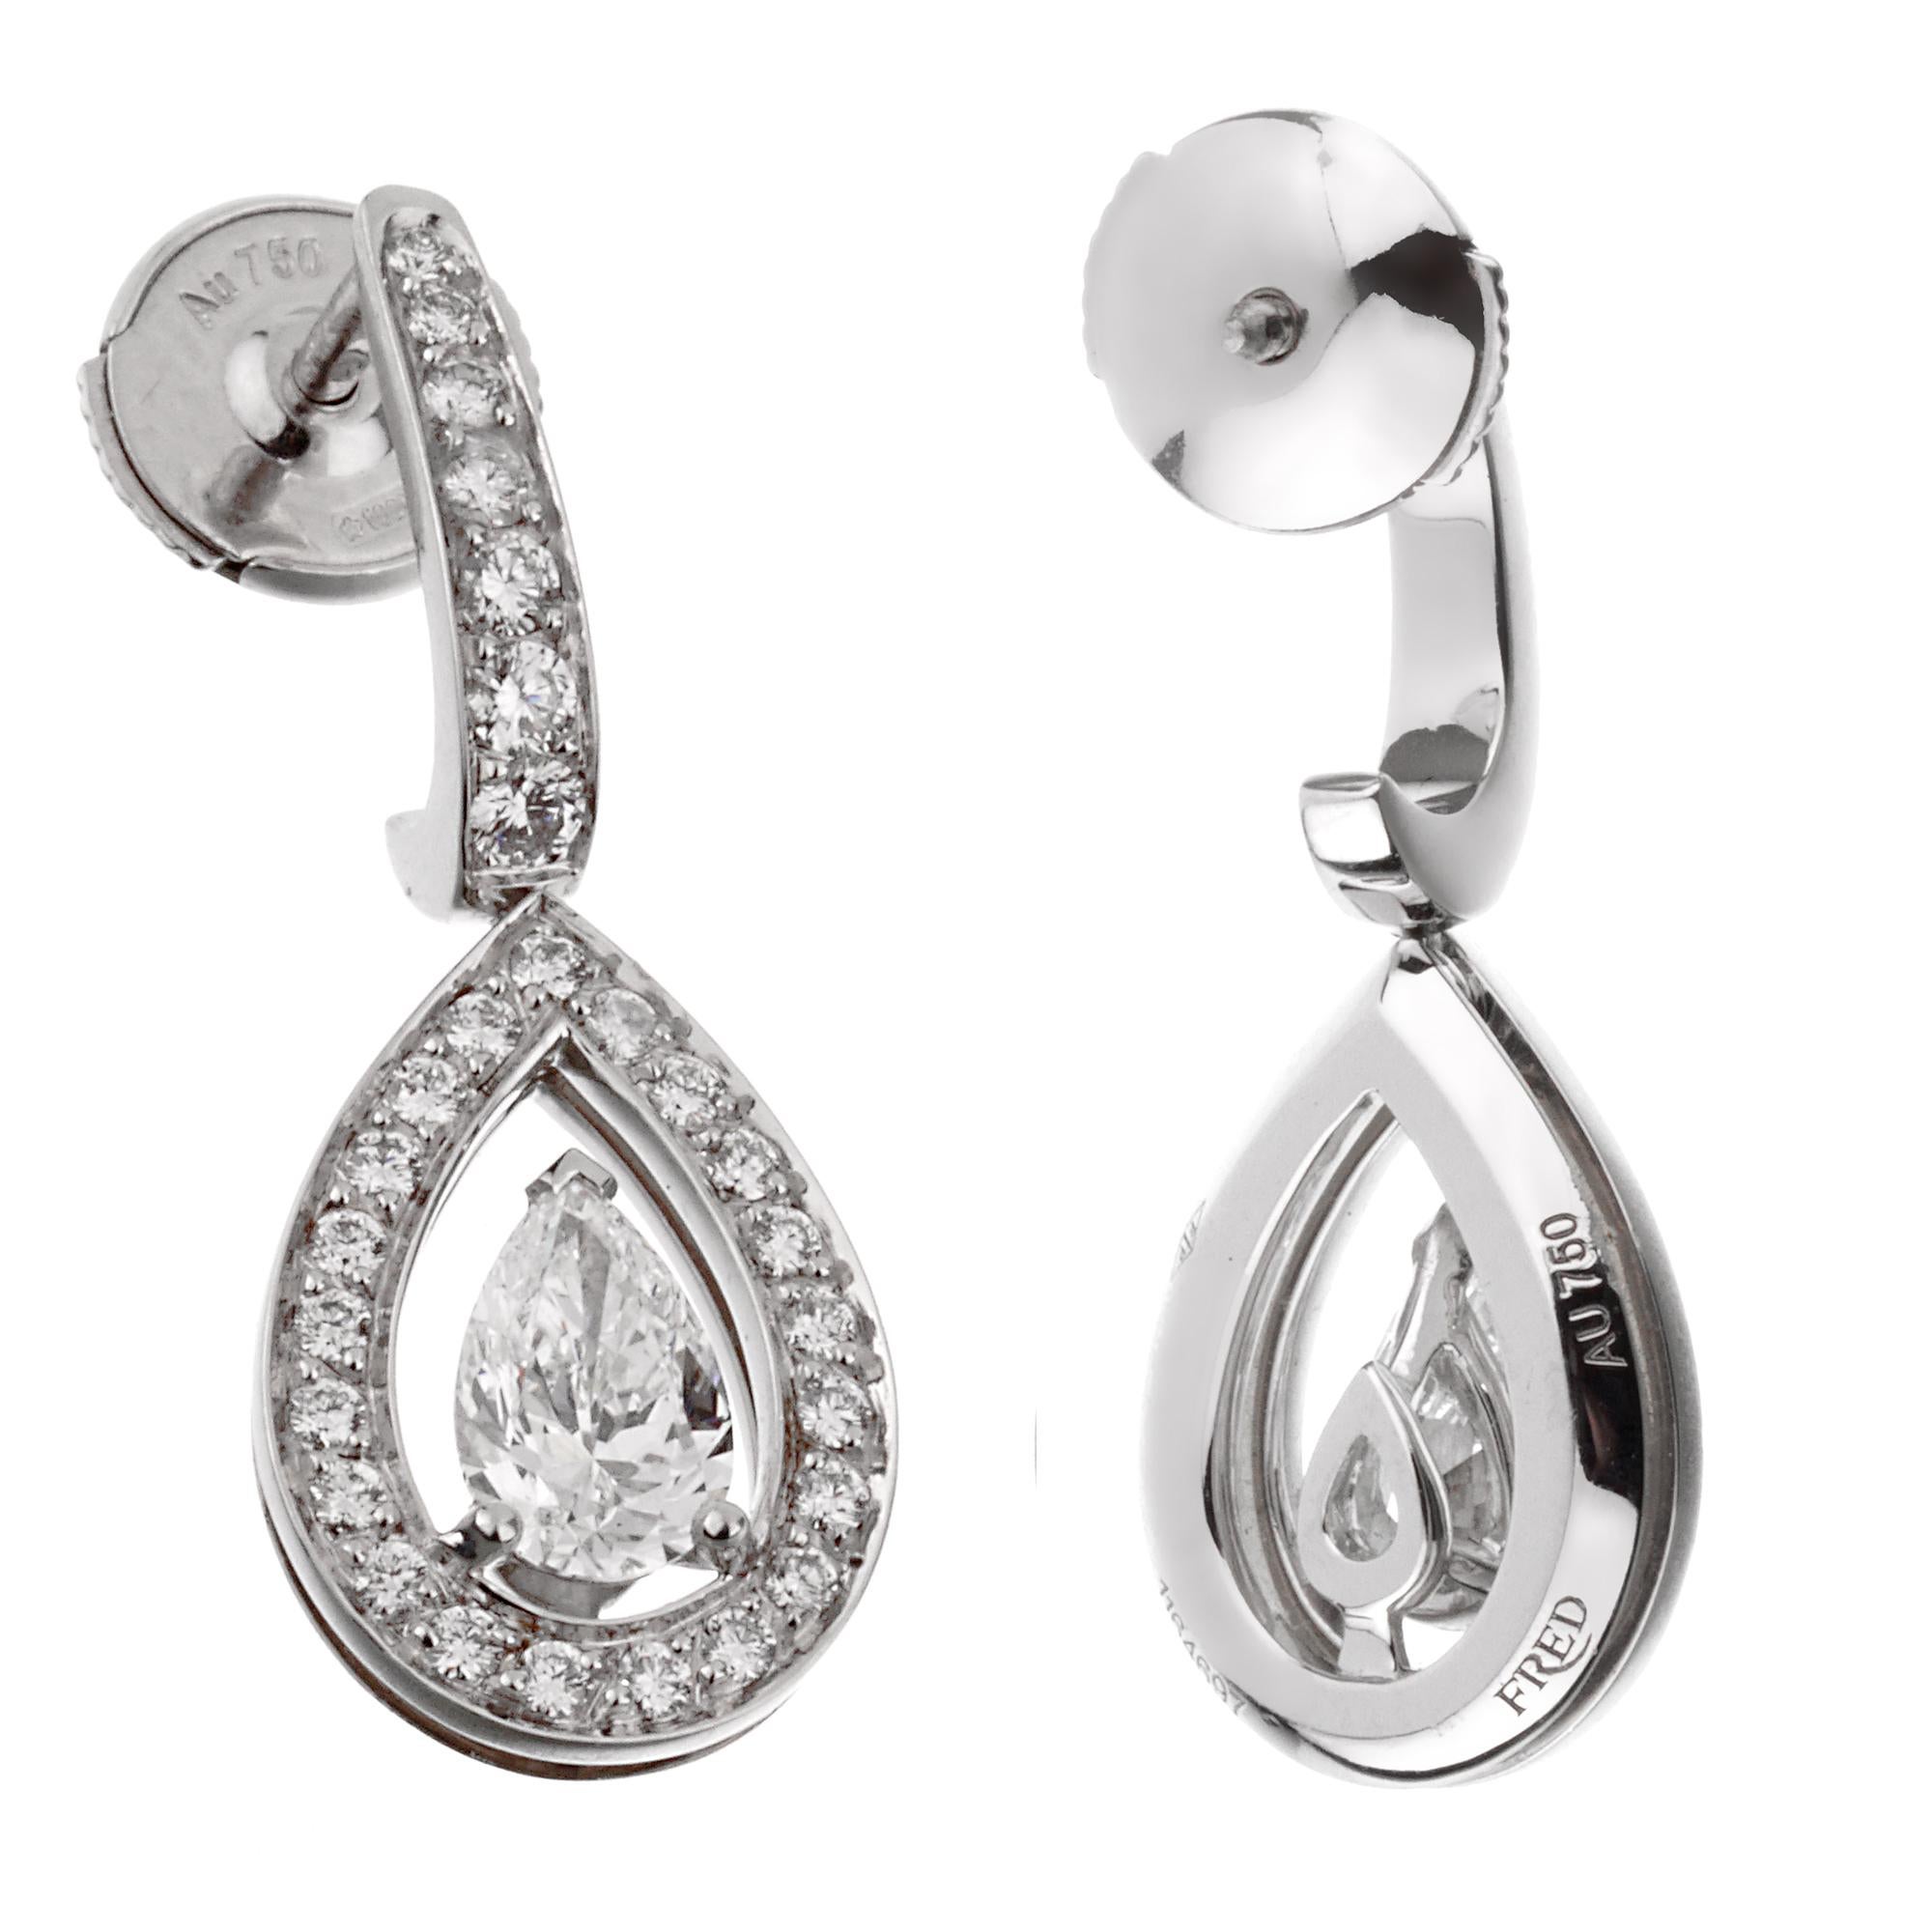 A stunning pair of Fred of Paris diamond drop earrings, each earring showcases a .51, and .52ct central pear shaped diamond adorned with round brilliant cut diamonds in shimmering 18k white gold. Each central pear shaped diamond is accompanied with